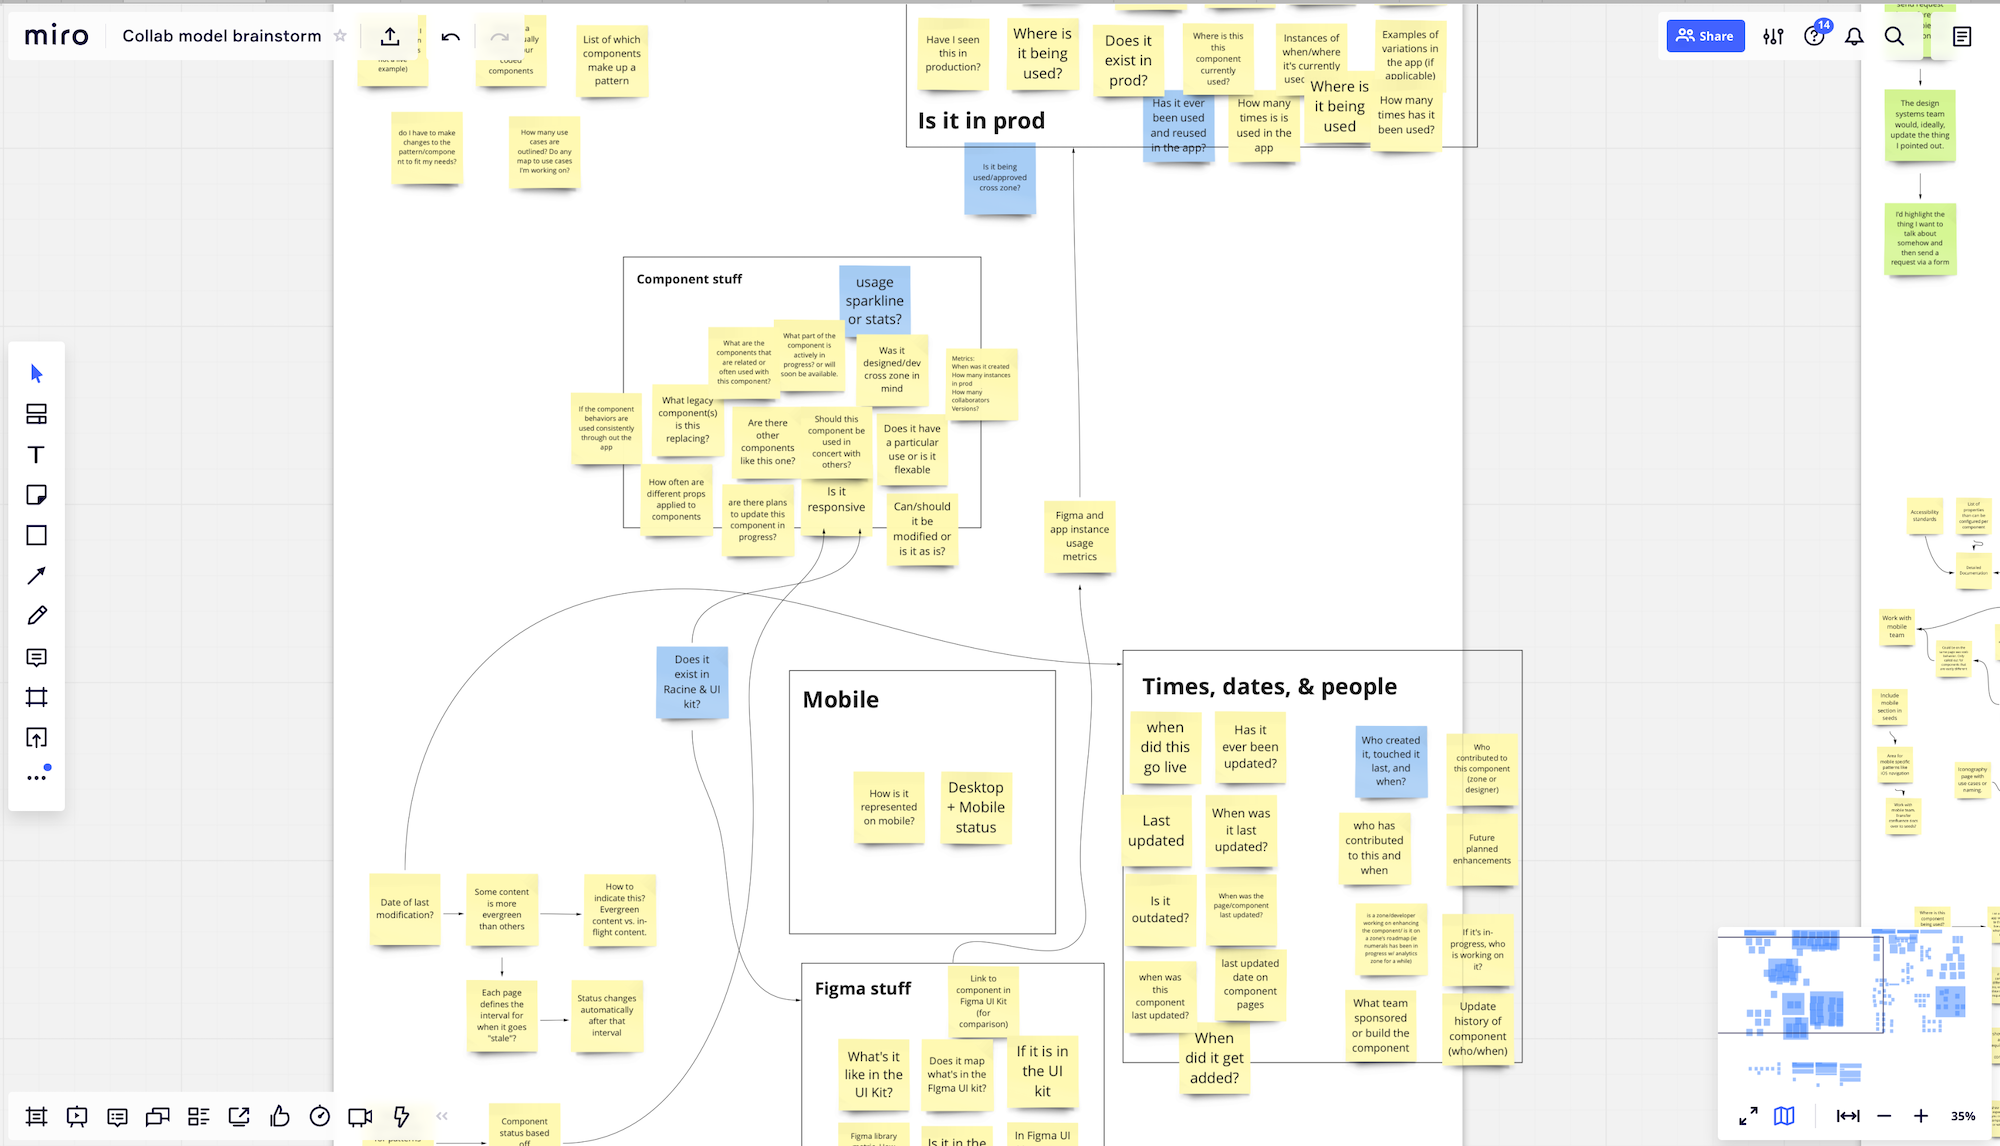 A screenshot of the results of our brainstorm with the team.